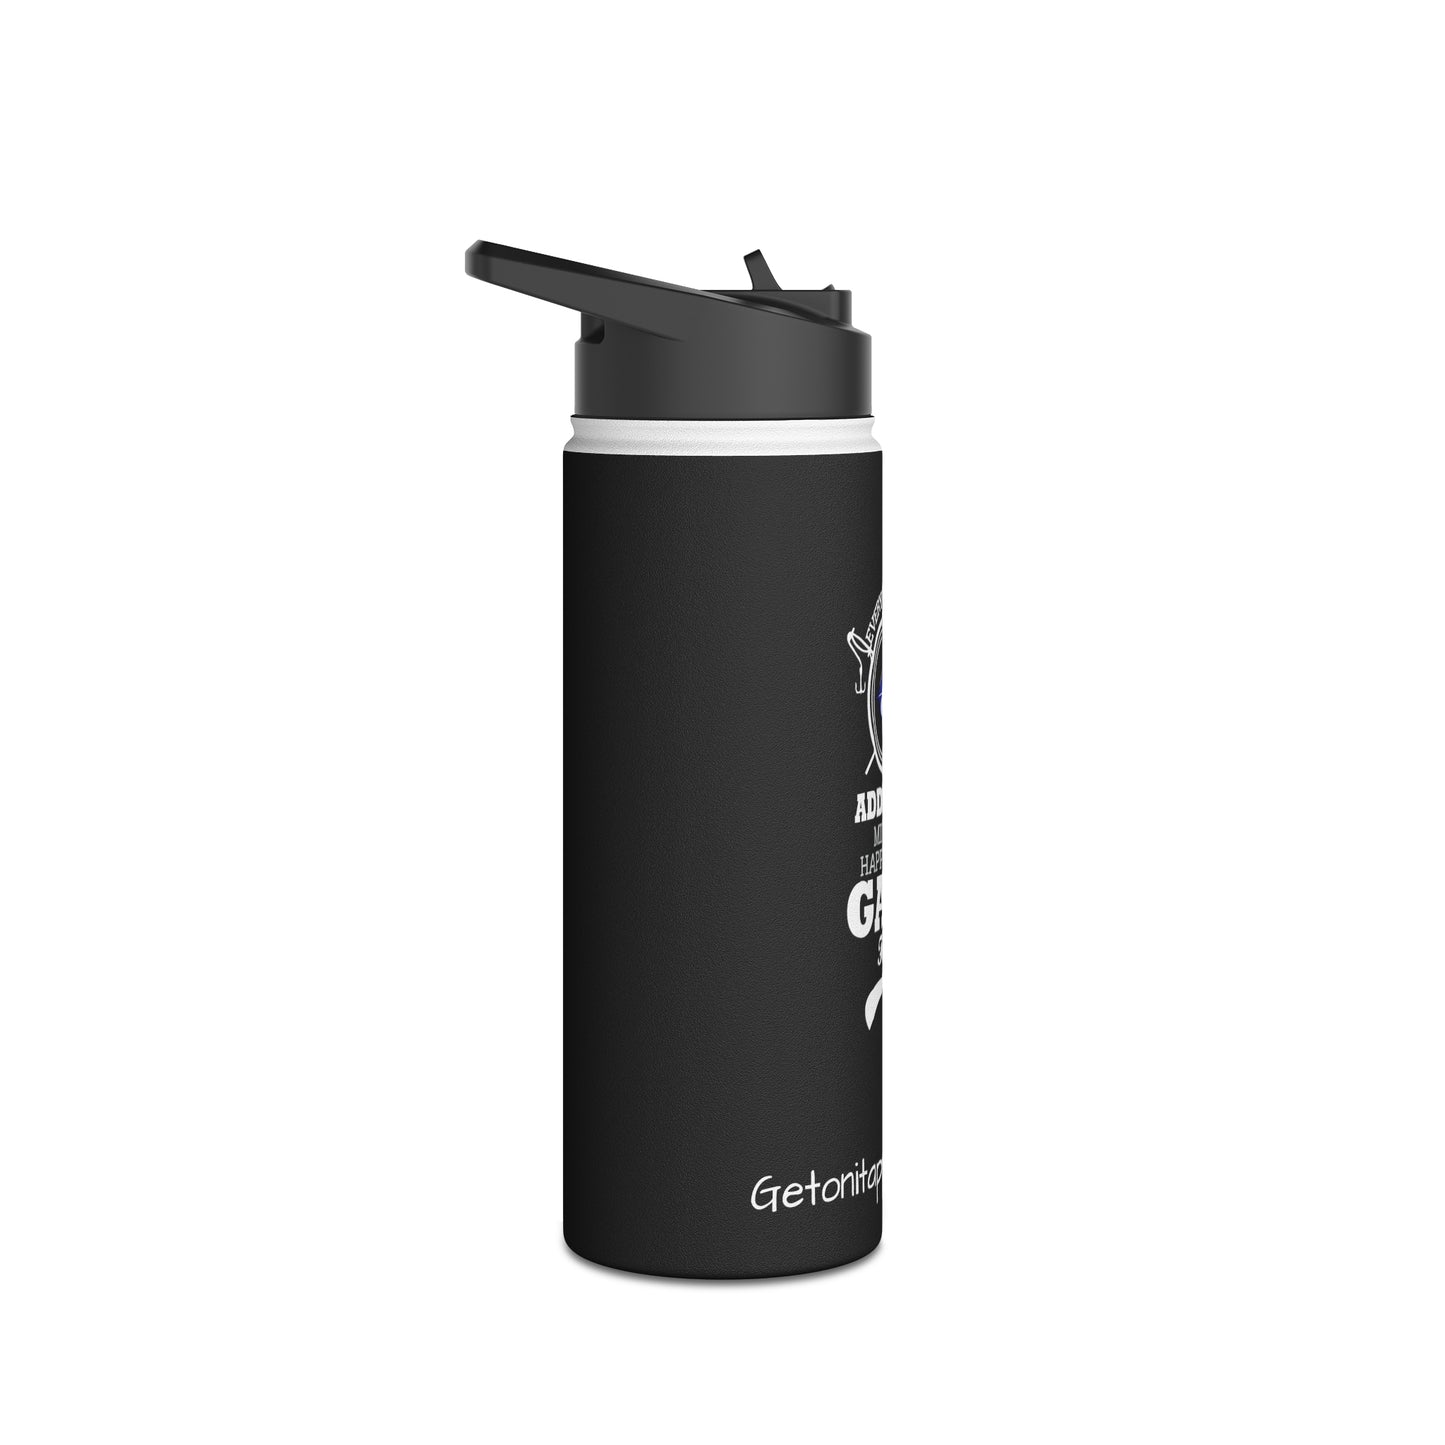 Stainless Steel Water Bottle - Everybody Has An Addiction Mine Just Happens To Be Game Fishing